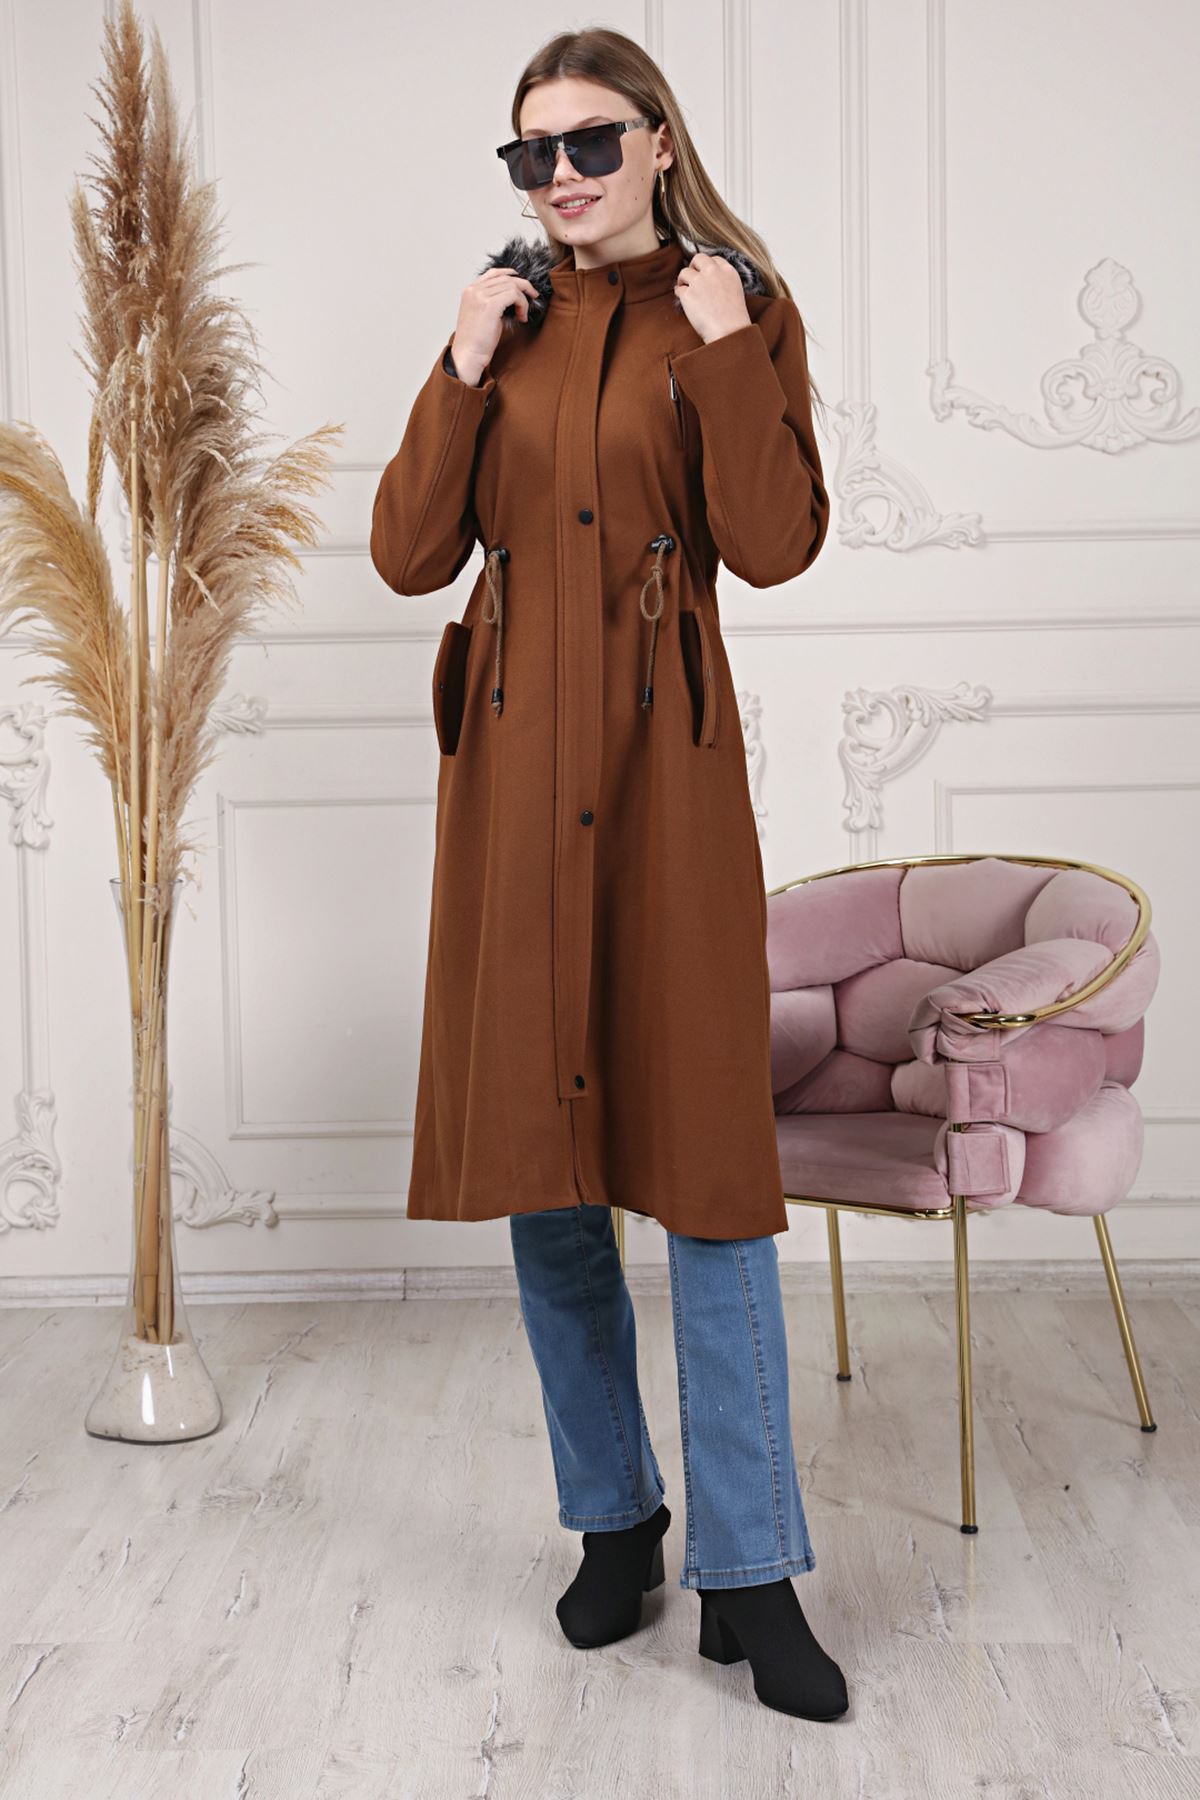 Hooded Long Women's Cashmere Coat with Drawstring Waist